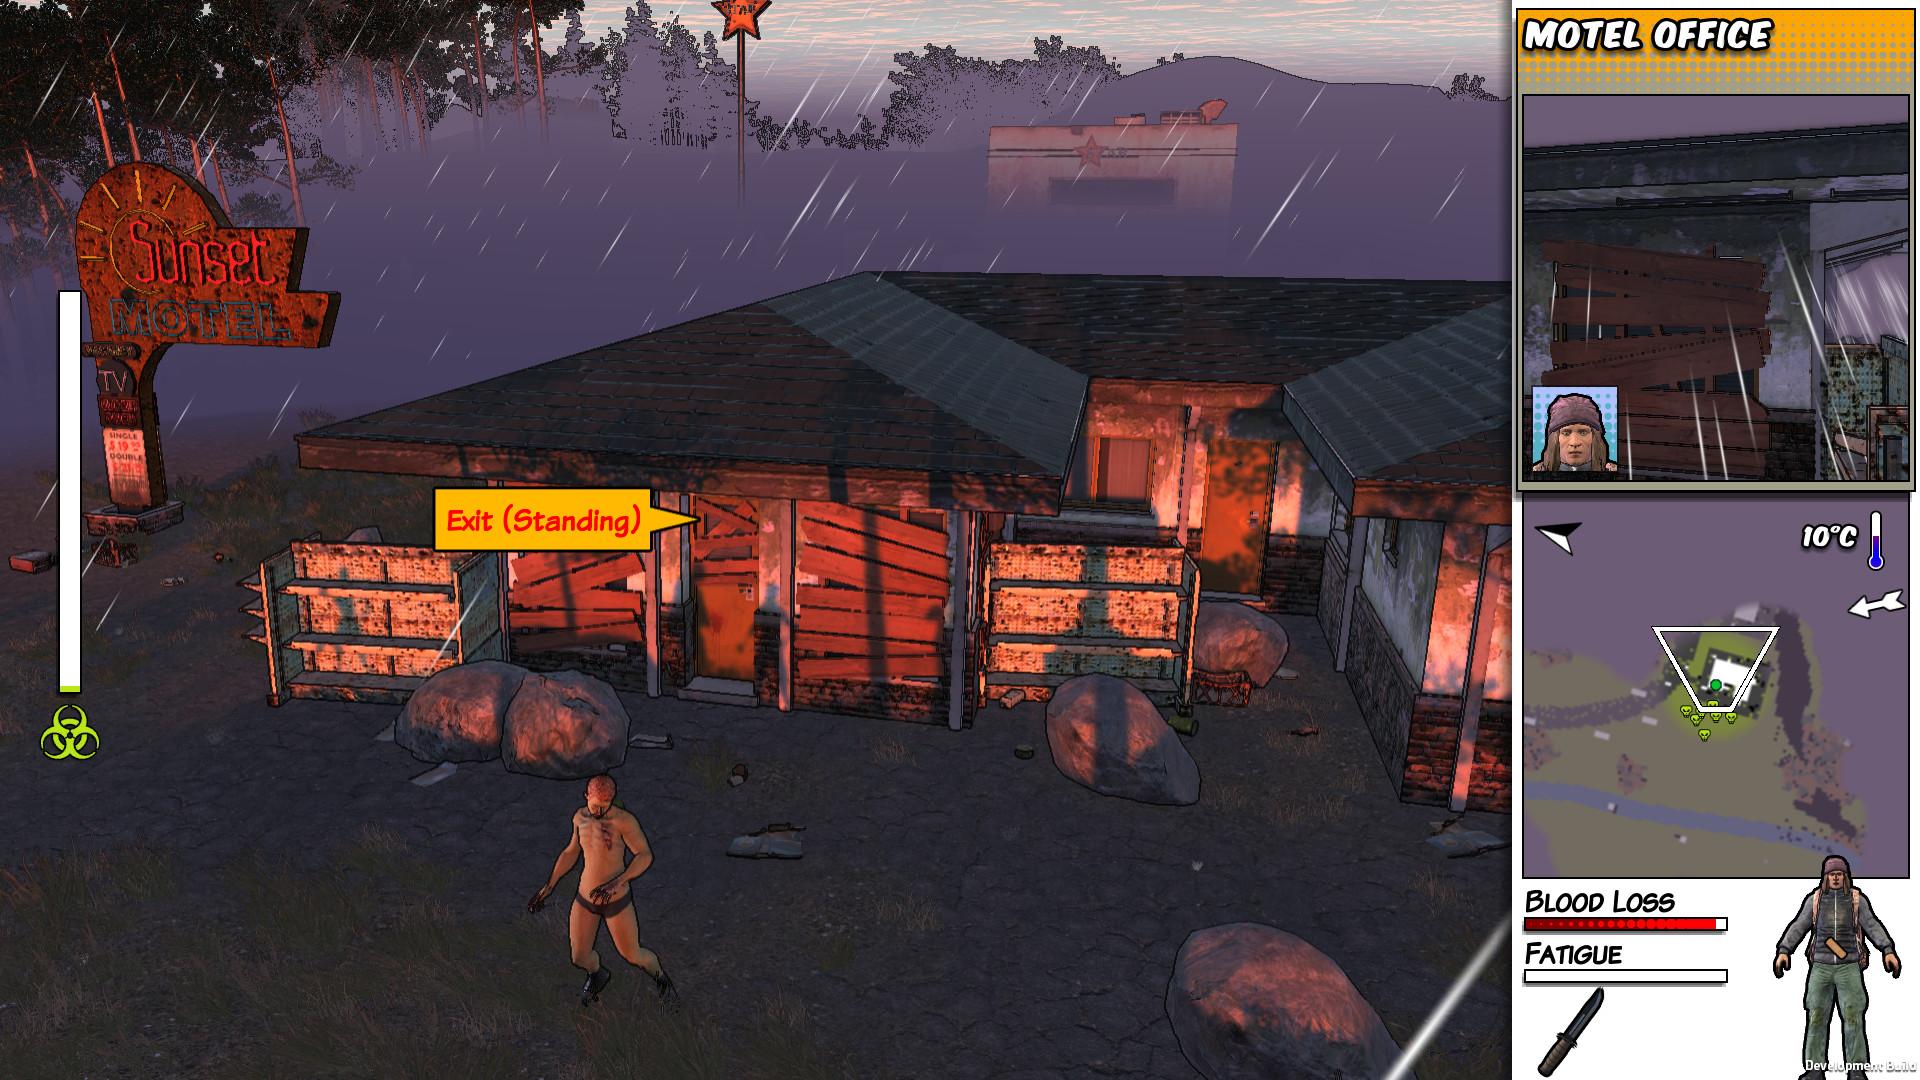 Screenshot №6 from game Survivalist: Invisible Strain